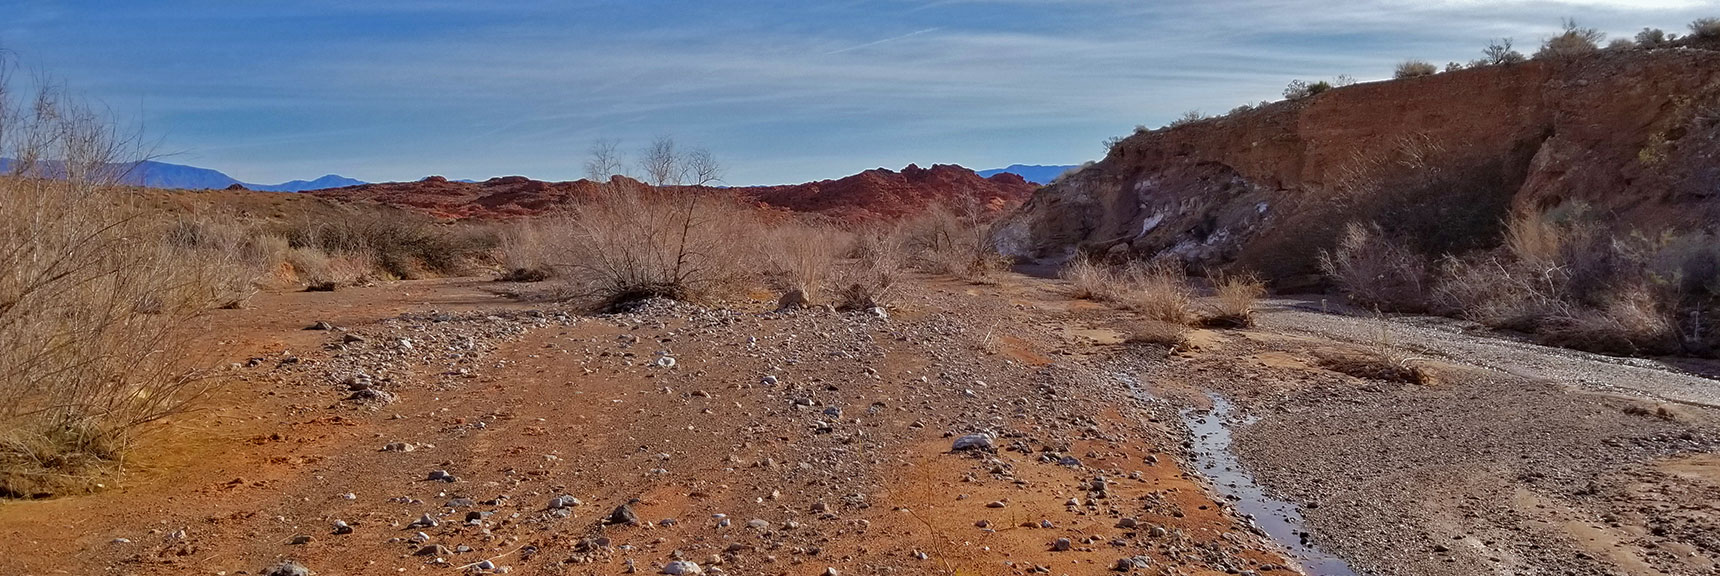 Traveling East Down Wash Beyond Old Arrowhead Trail in Valley of Fire State Park, Nevada